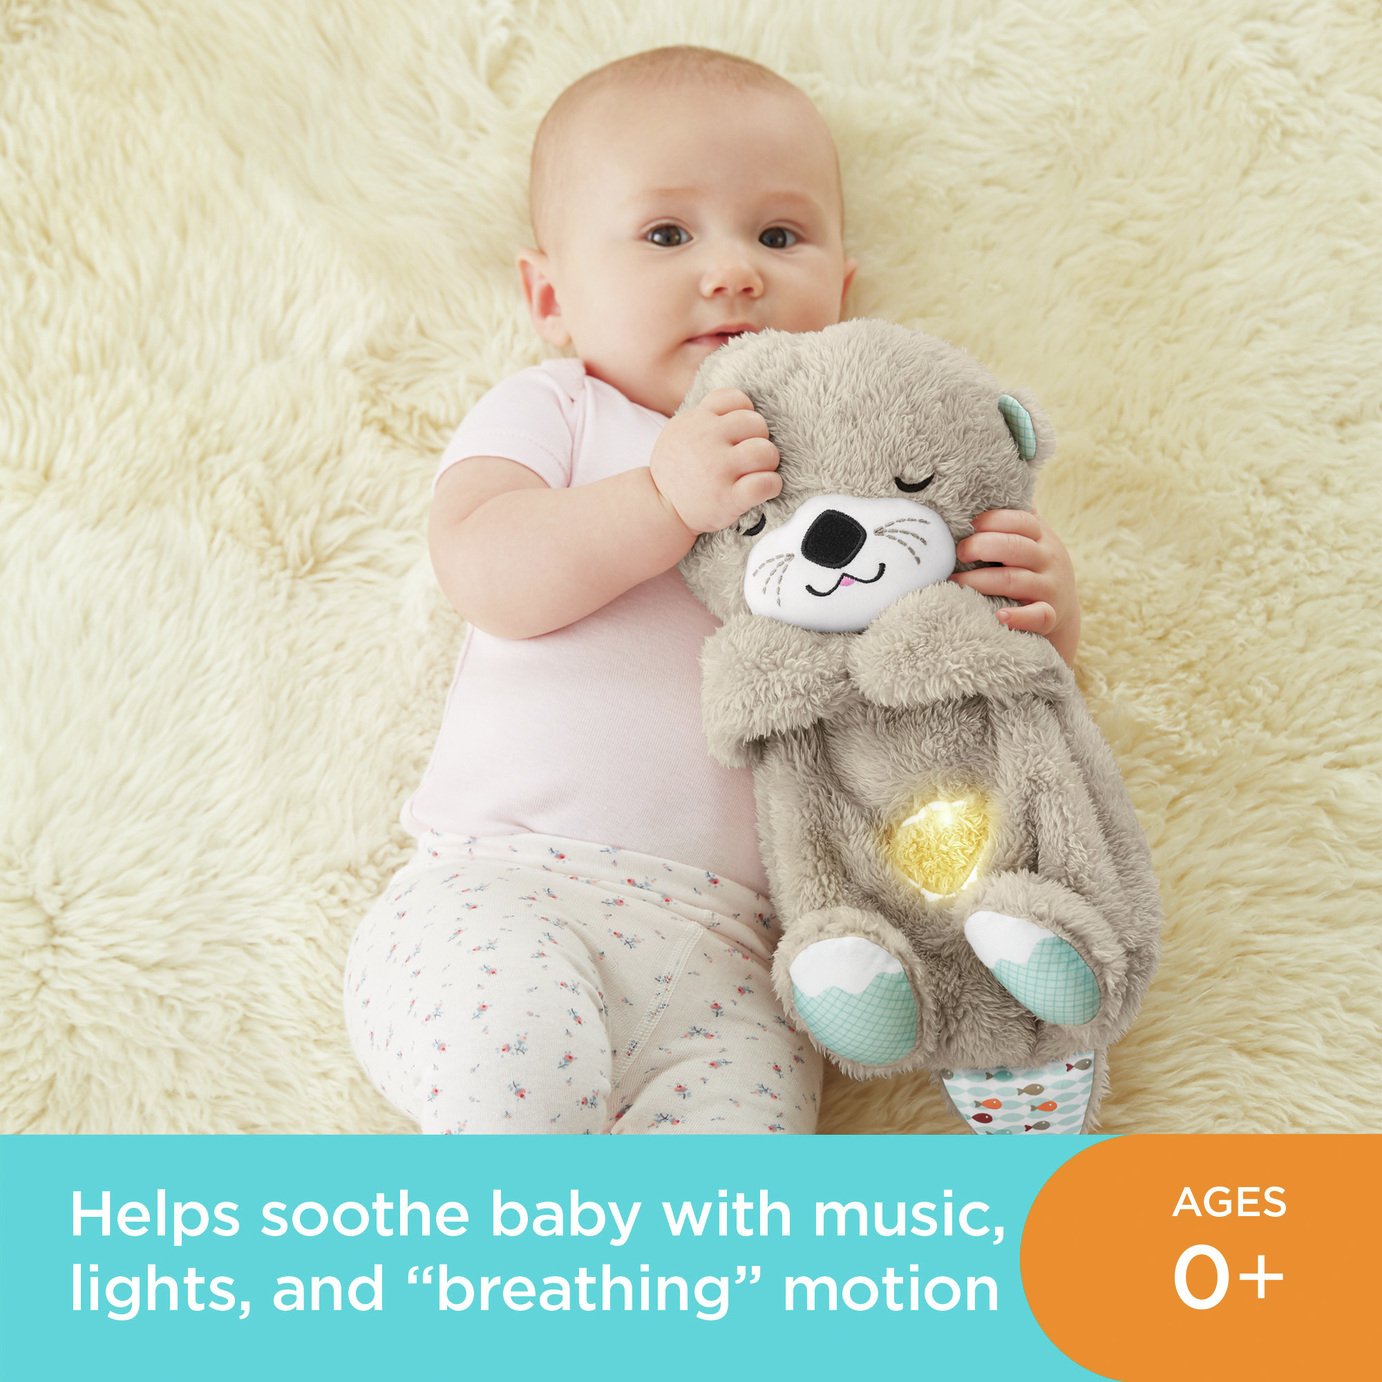 Fisher-Price Soothe 'n Snuggle Otter Baby Toy Review